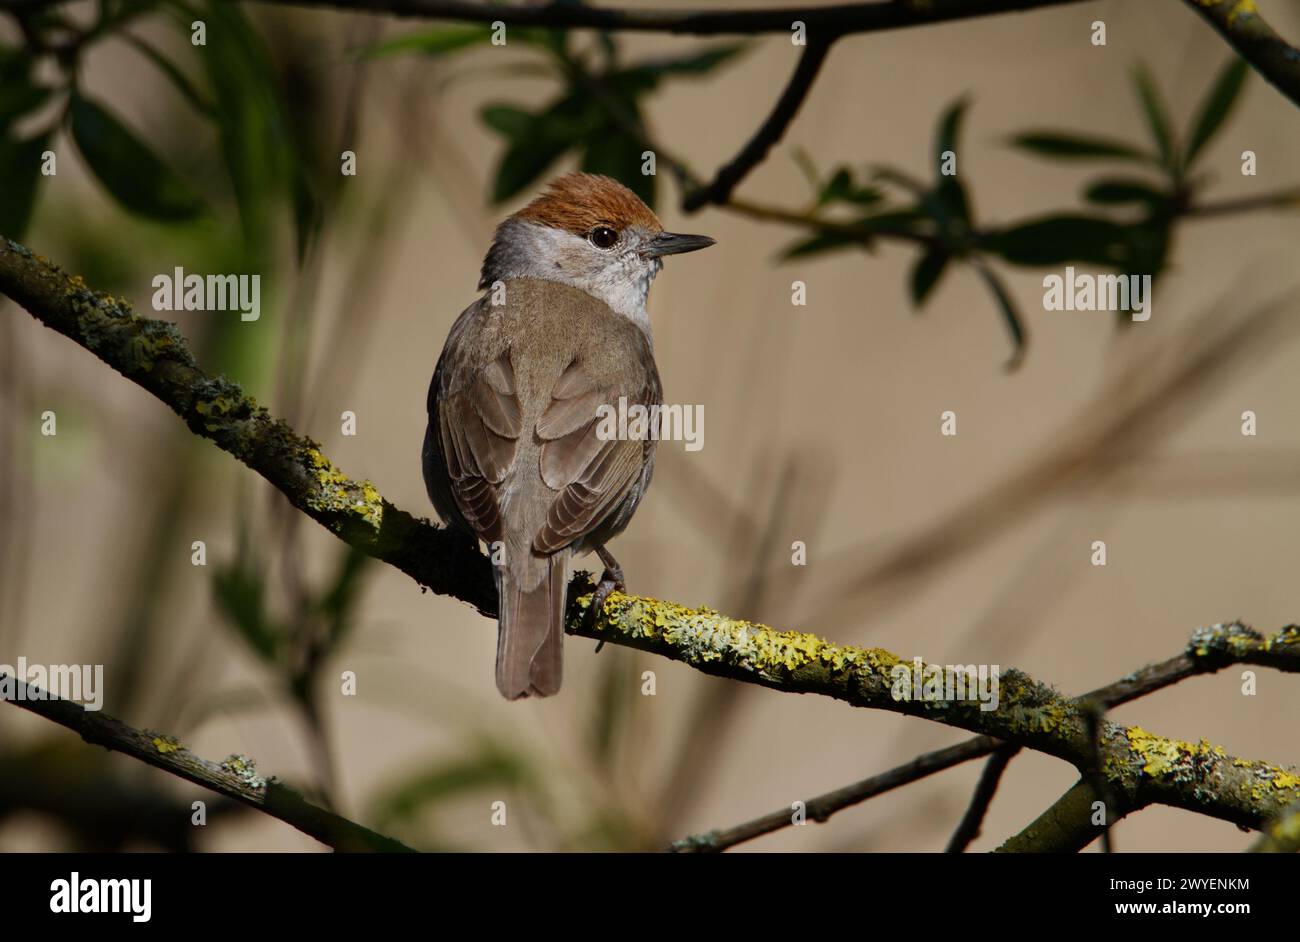 Female Blackcap Bird, Sylvia atricapilla With Distinctive Chestnut Brown Cap Perched On A Lichen Covered Branch, New Forest UK Stock Photo